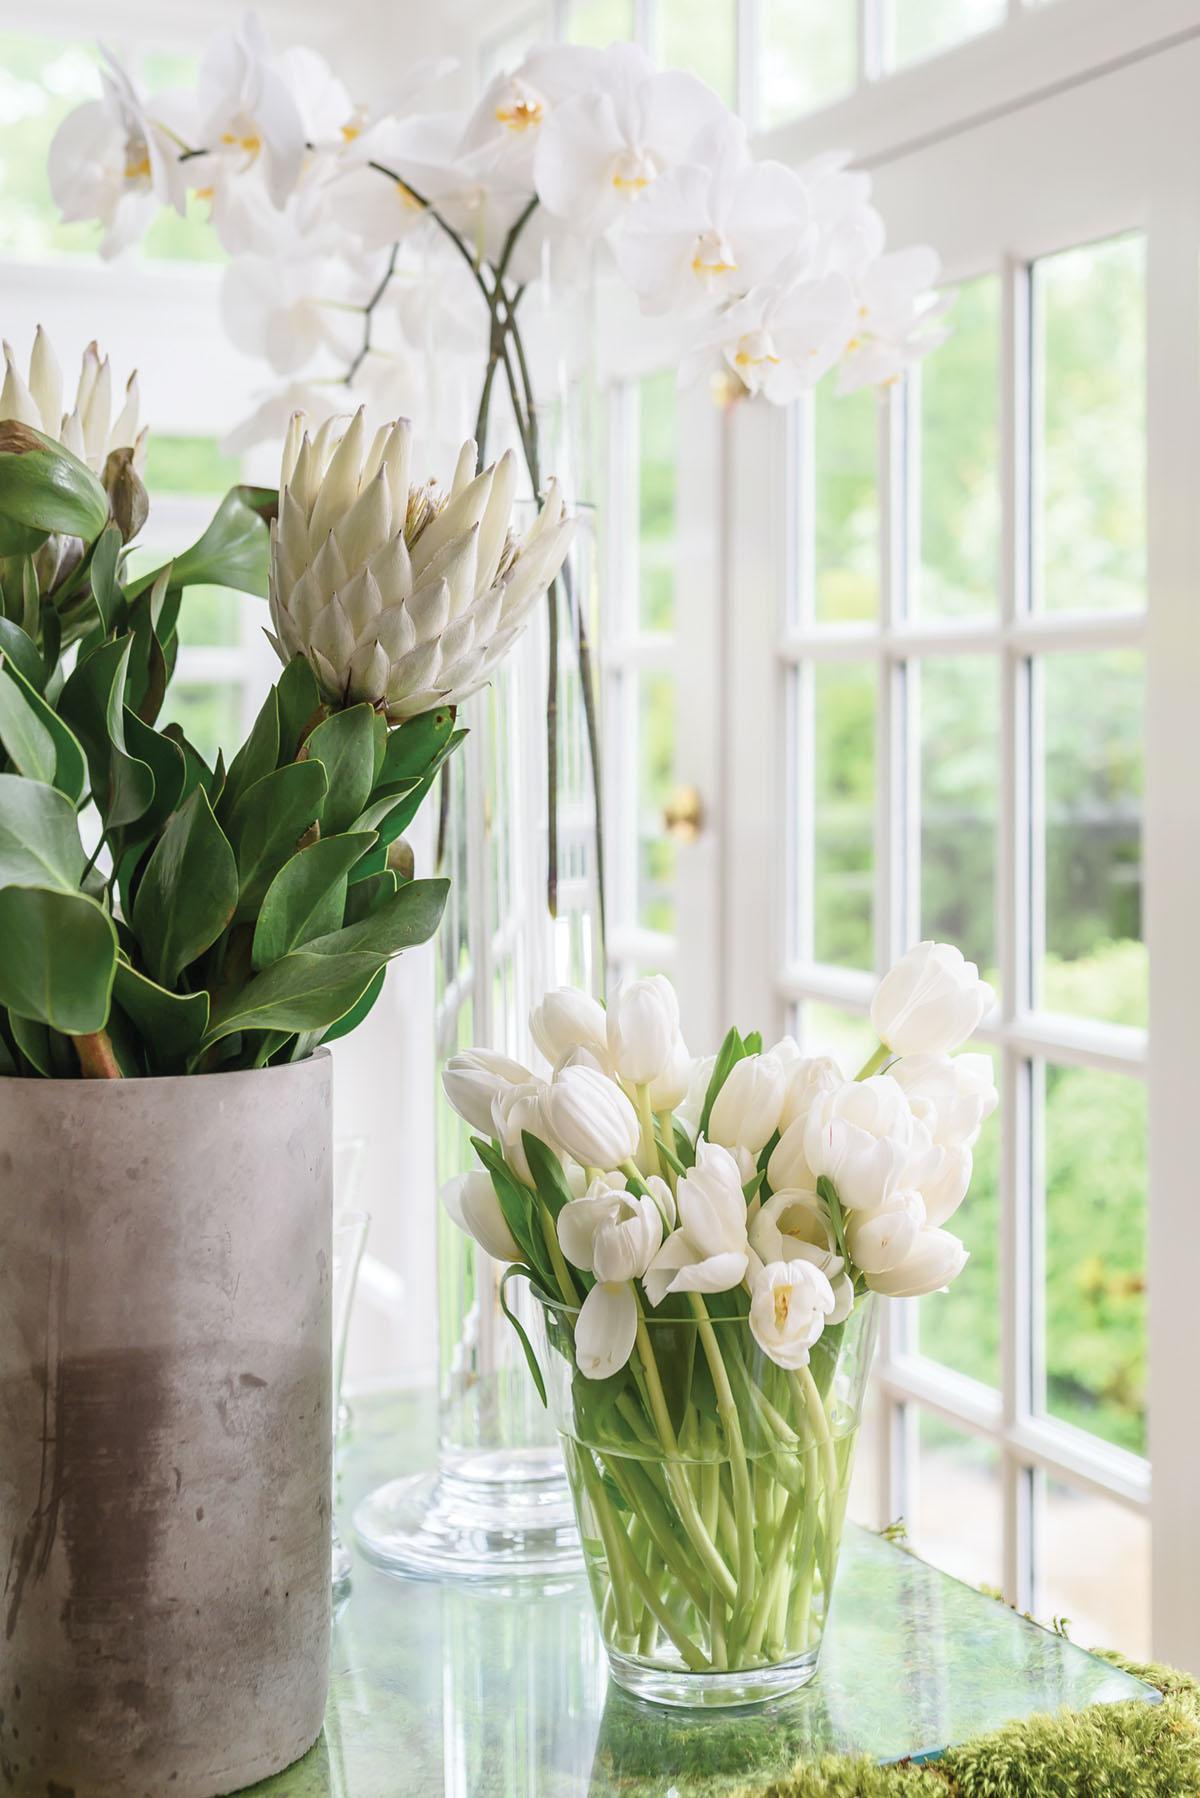 vases of white flowers, arrangement in bunches of a single variety of blooms, including tulips, protea, and orchis